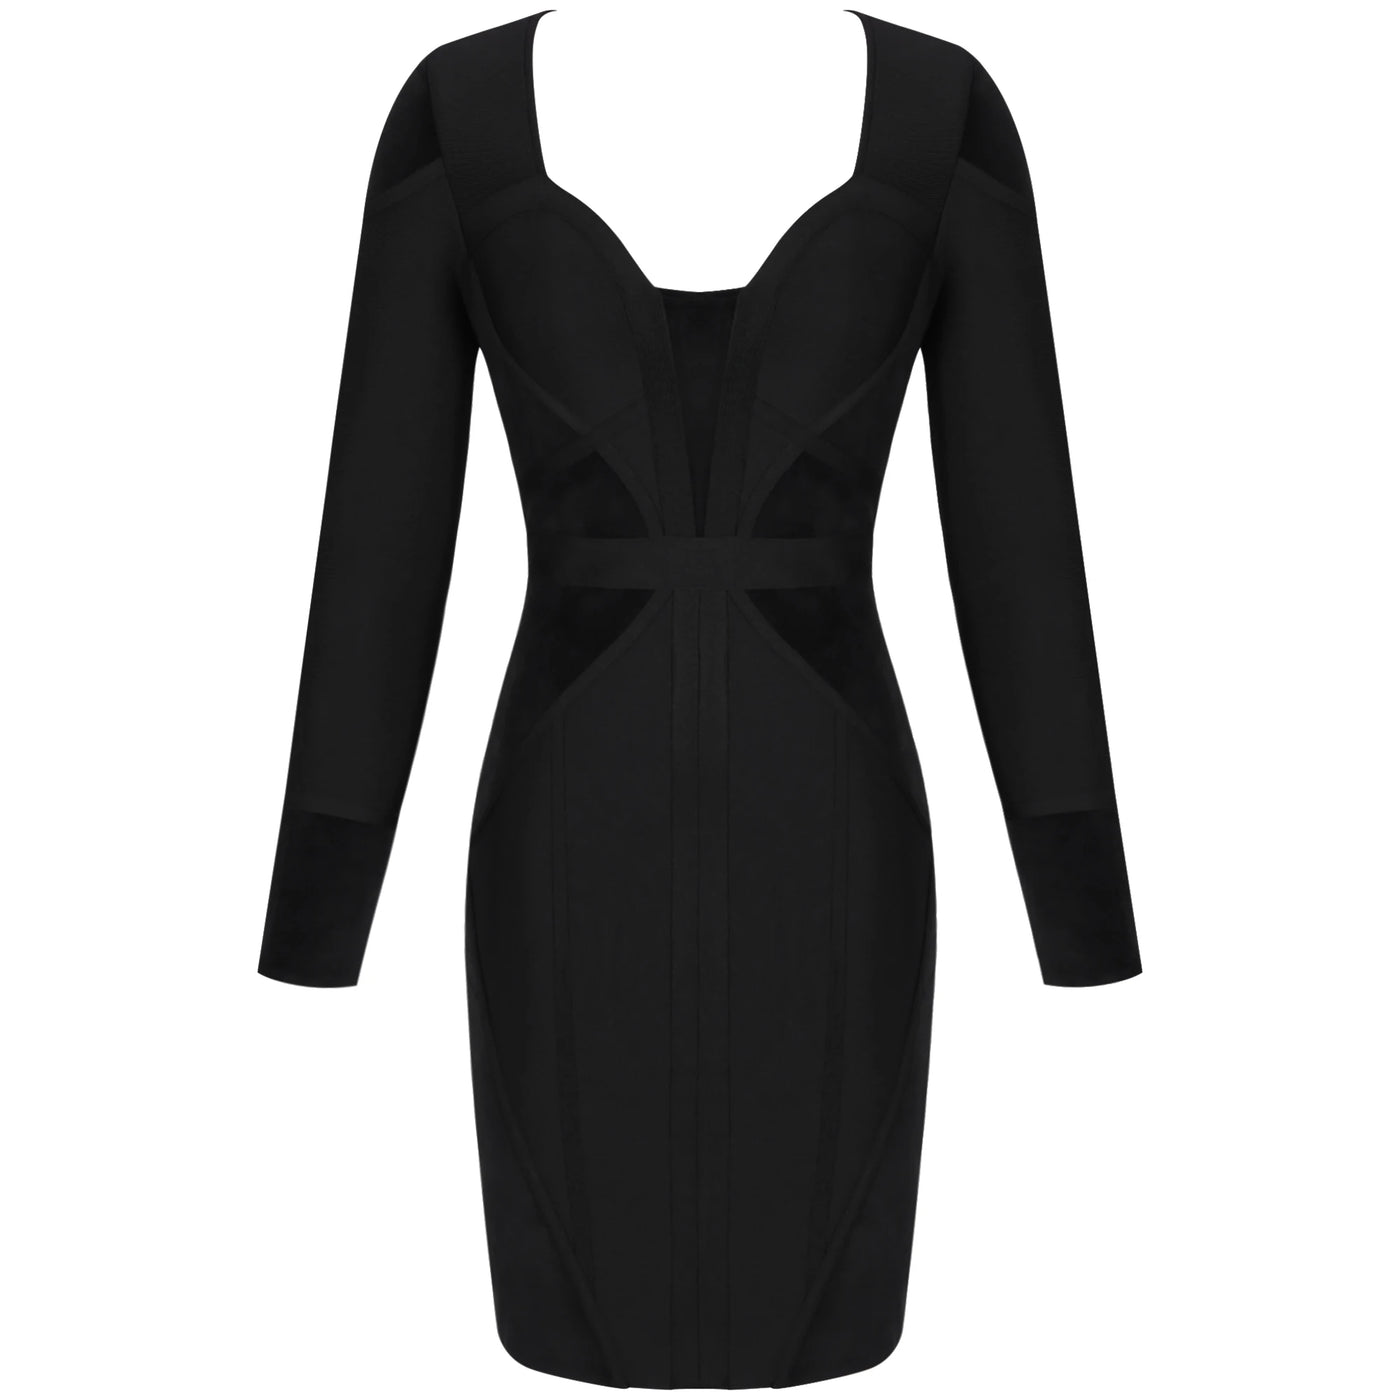 Ocstrade New Arrival Suede Long Sleeve Bandage Dress 2020 Fall Winter Women Black Bandage Dress Bodycon Sexy Club Party Dress